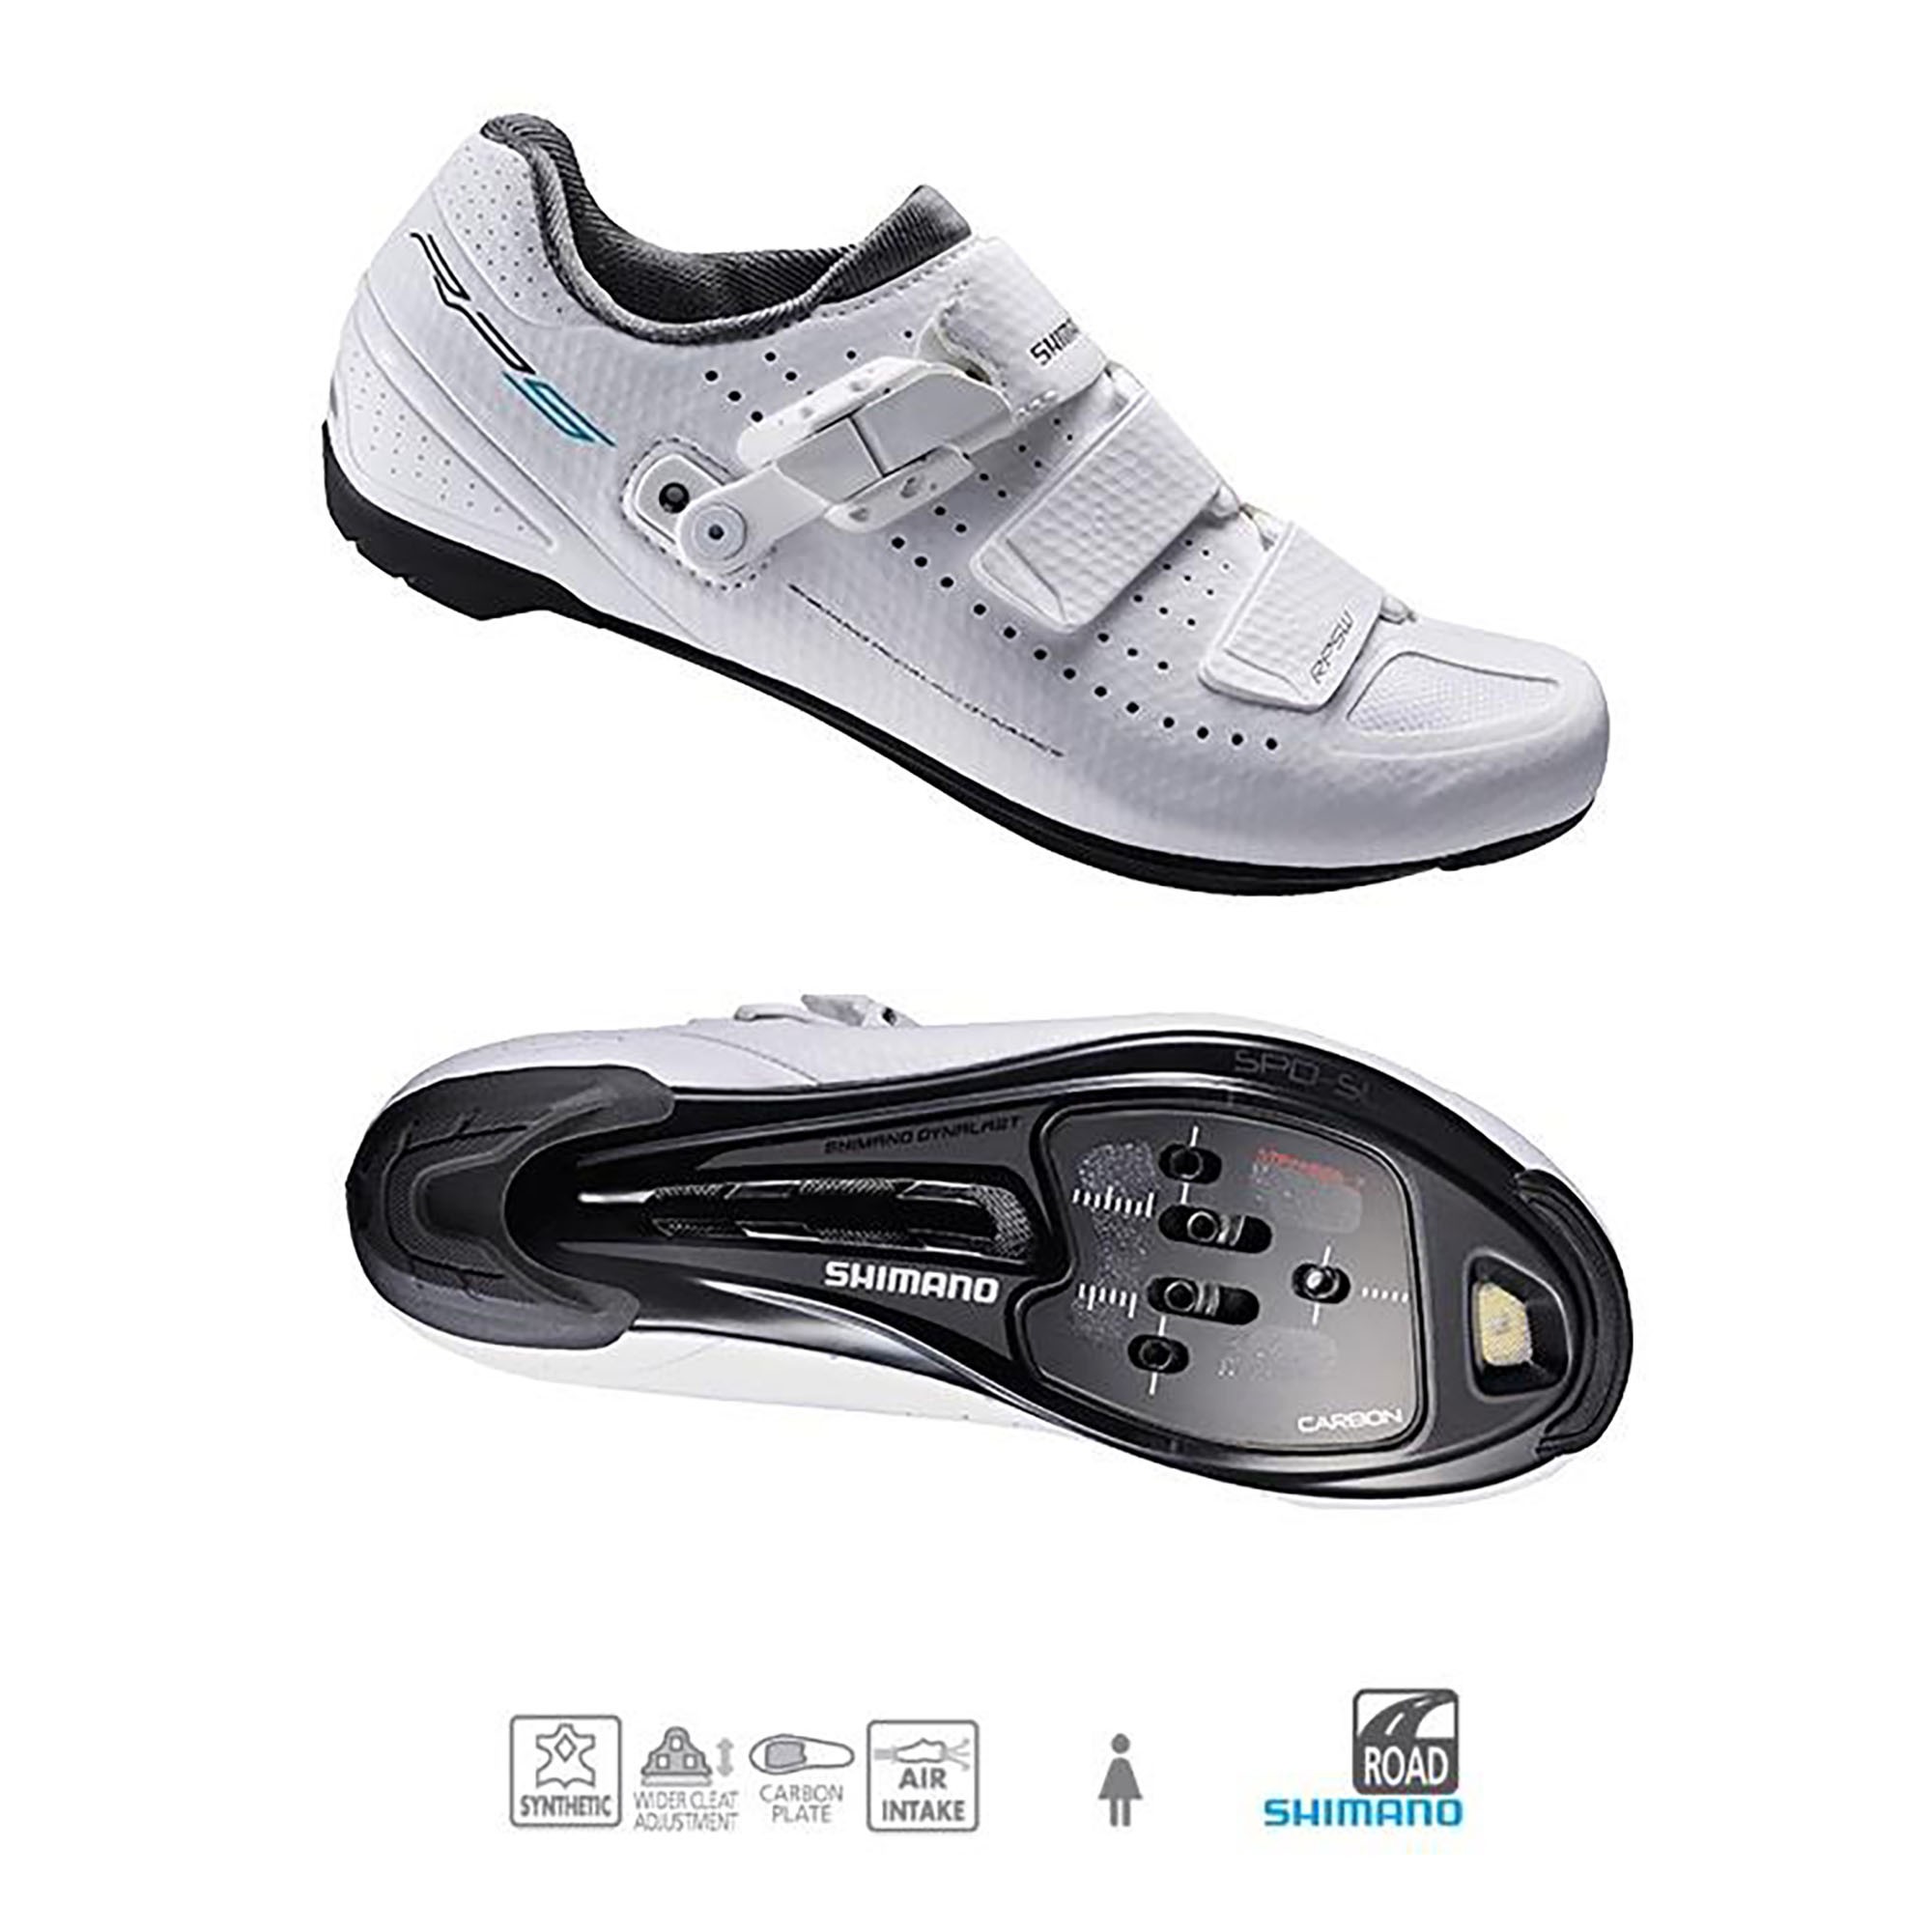 Chaussures vélo route Shimano SH-RP5 Blanc